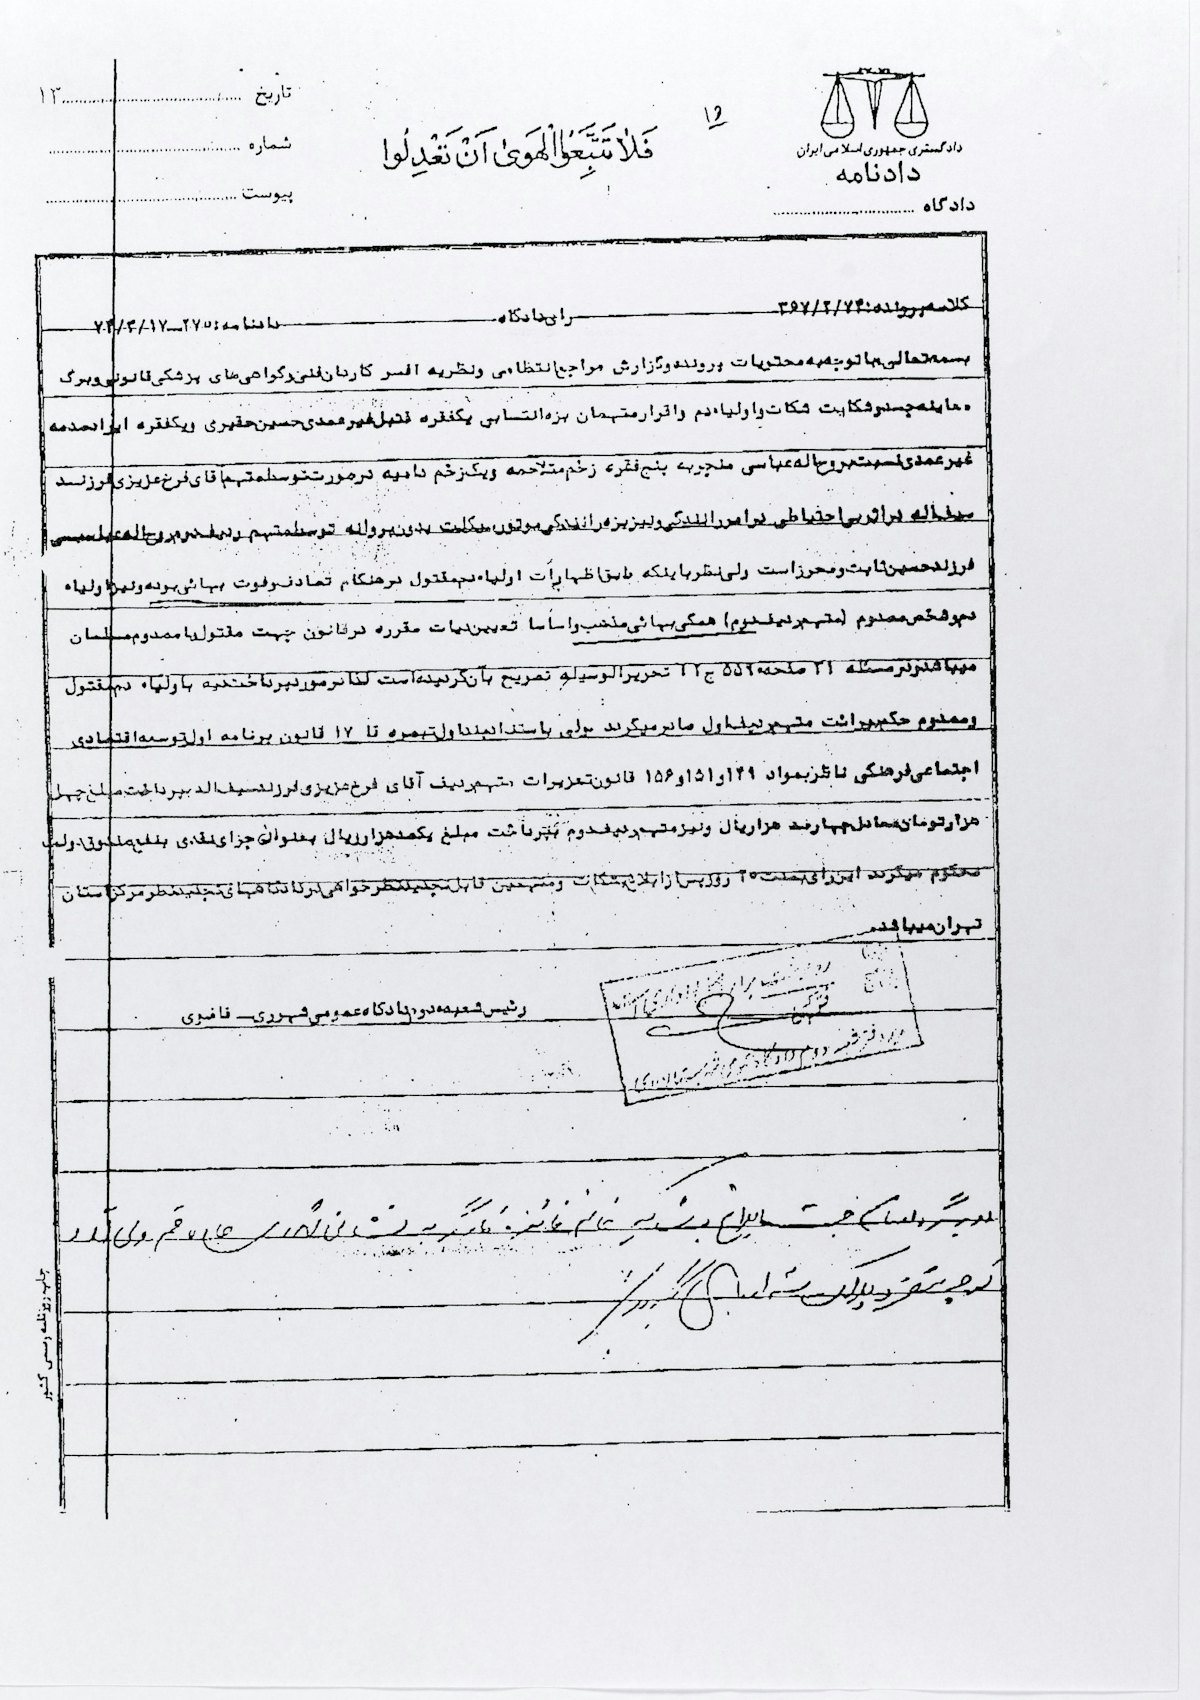 A court verdict from the government’s Department of Justice regarding the murder of a Baha’i man which states that, “as the victim was a Baha’i at the time of accident… and the fact that the provision of blood money [diyeh] is only legally applicable to Muslims,” the accused is acquitted of charges.